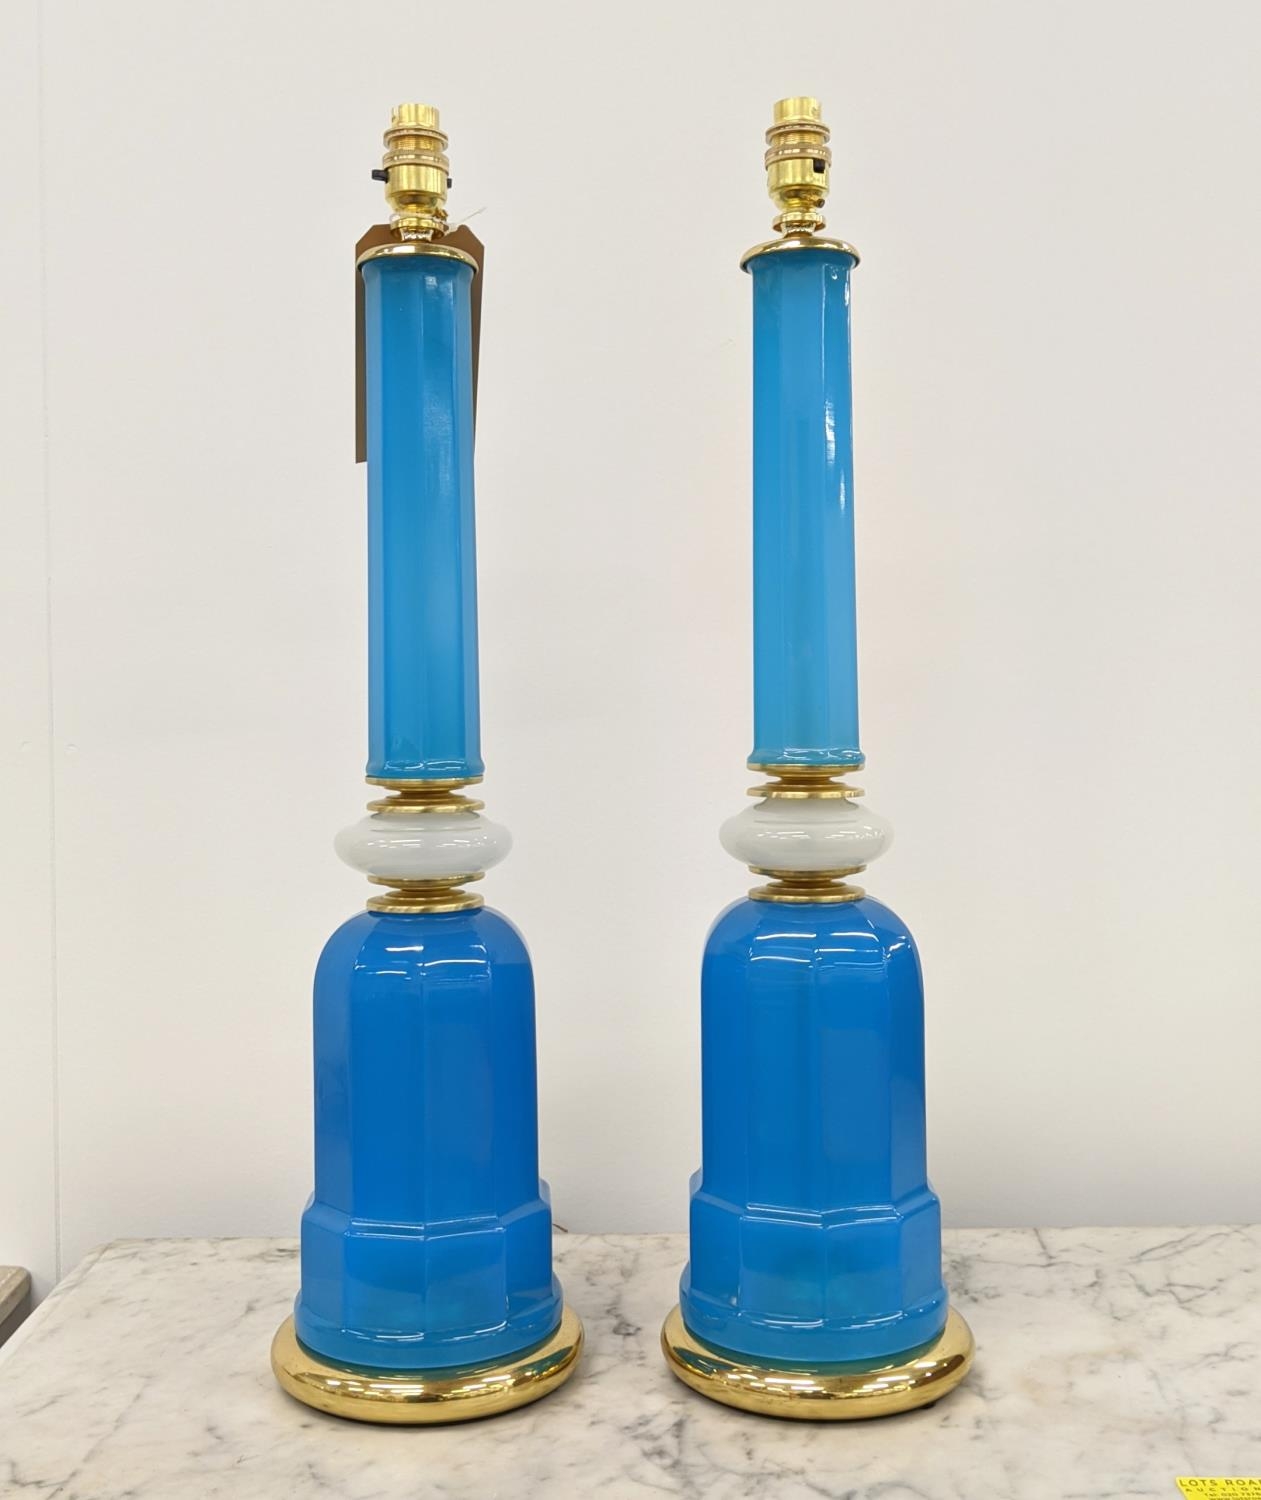 CENEDESE MURANO GLASS TABLE LAMPS, a pair, vintage blue and white opaline glass, gilt metal bases, - Image 5 of 5